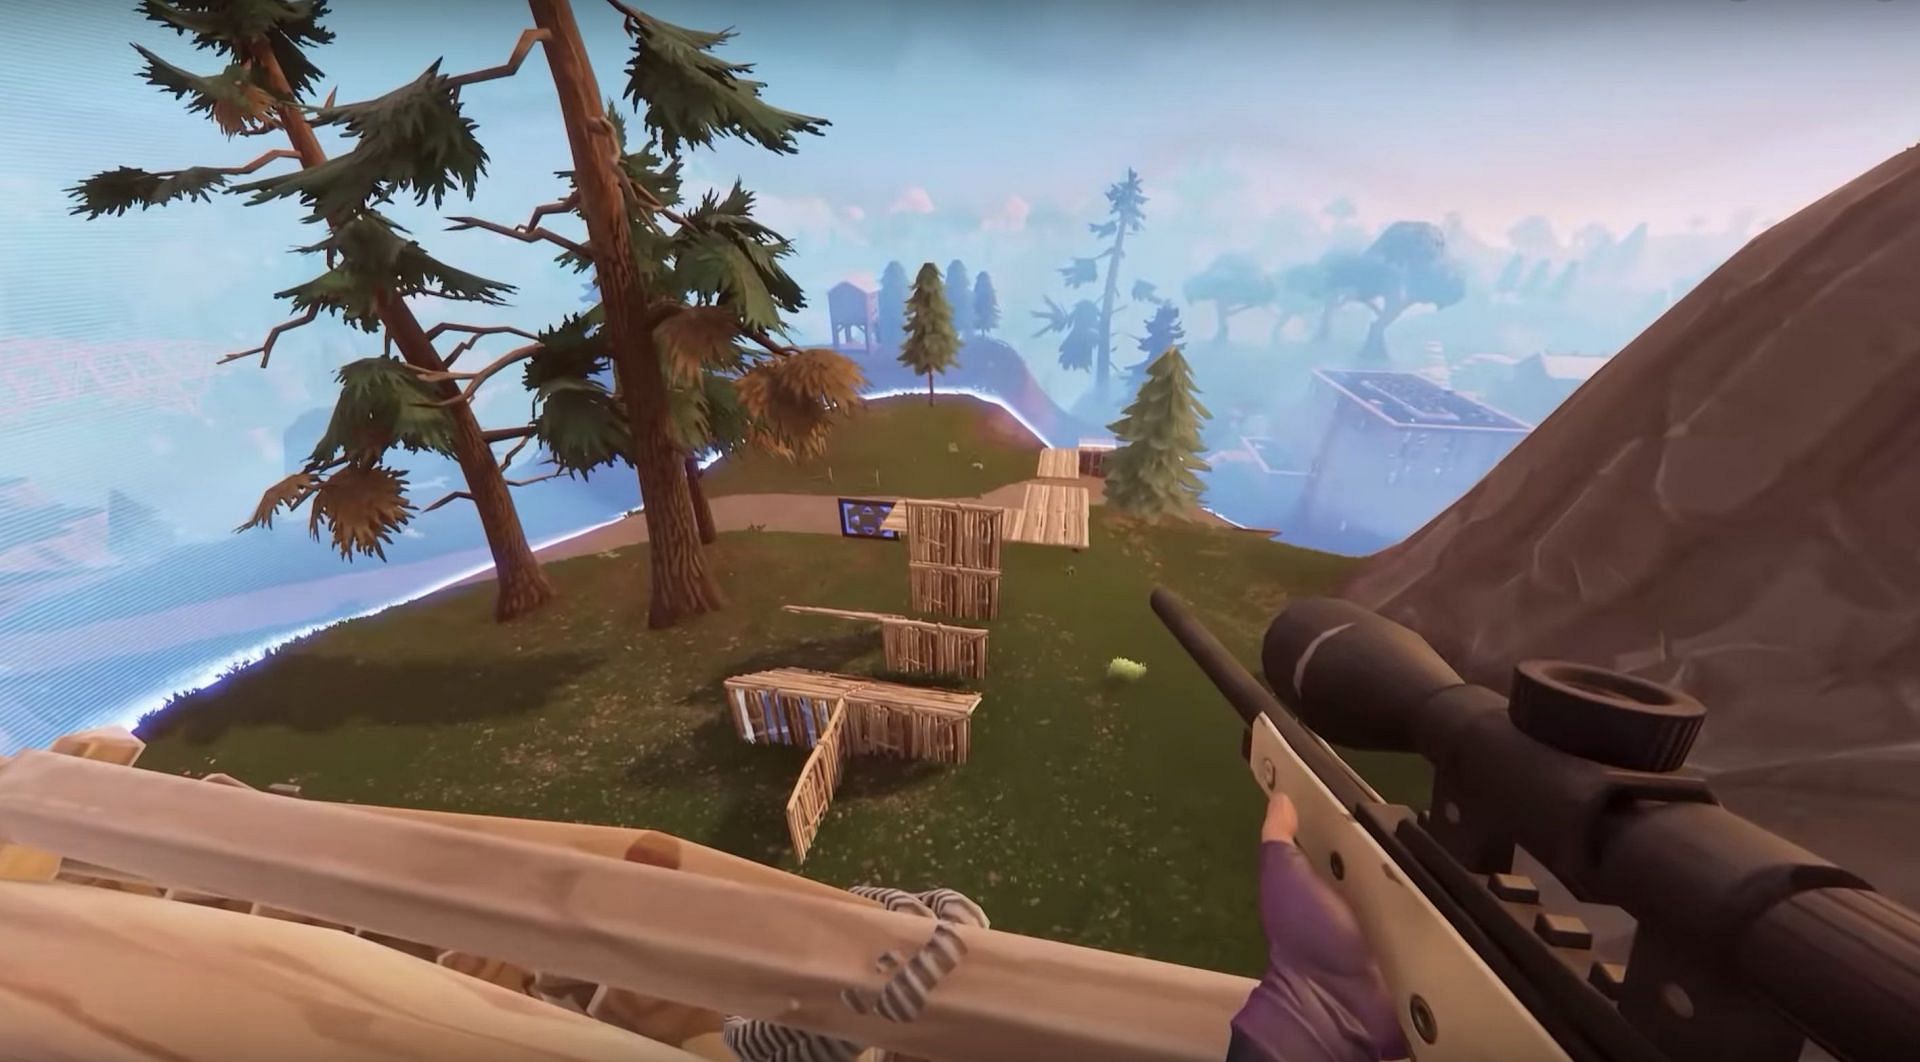 First-person sniper feed in Fortnite (Image via Twitter/ThisIsITalk)